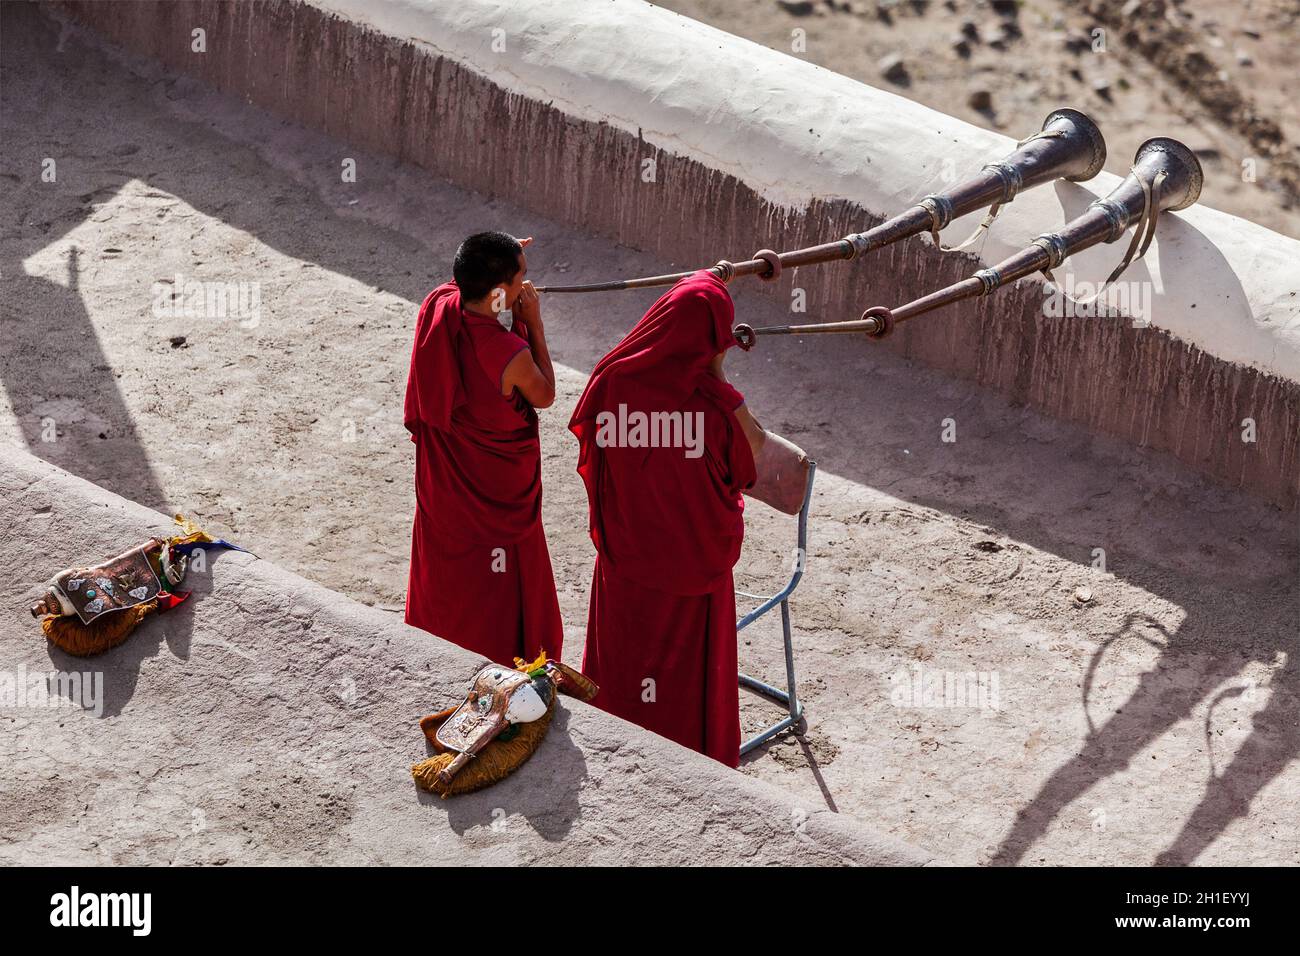 THIKSEY, INDIA - SEPTEMBER 4, 2011: Two Tibetan Buddhist monks blowing Tibetan horn (dungche) during morning pooja, Thiksey gompa, Ladakh, India Stock Photo